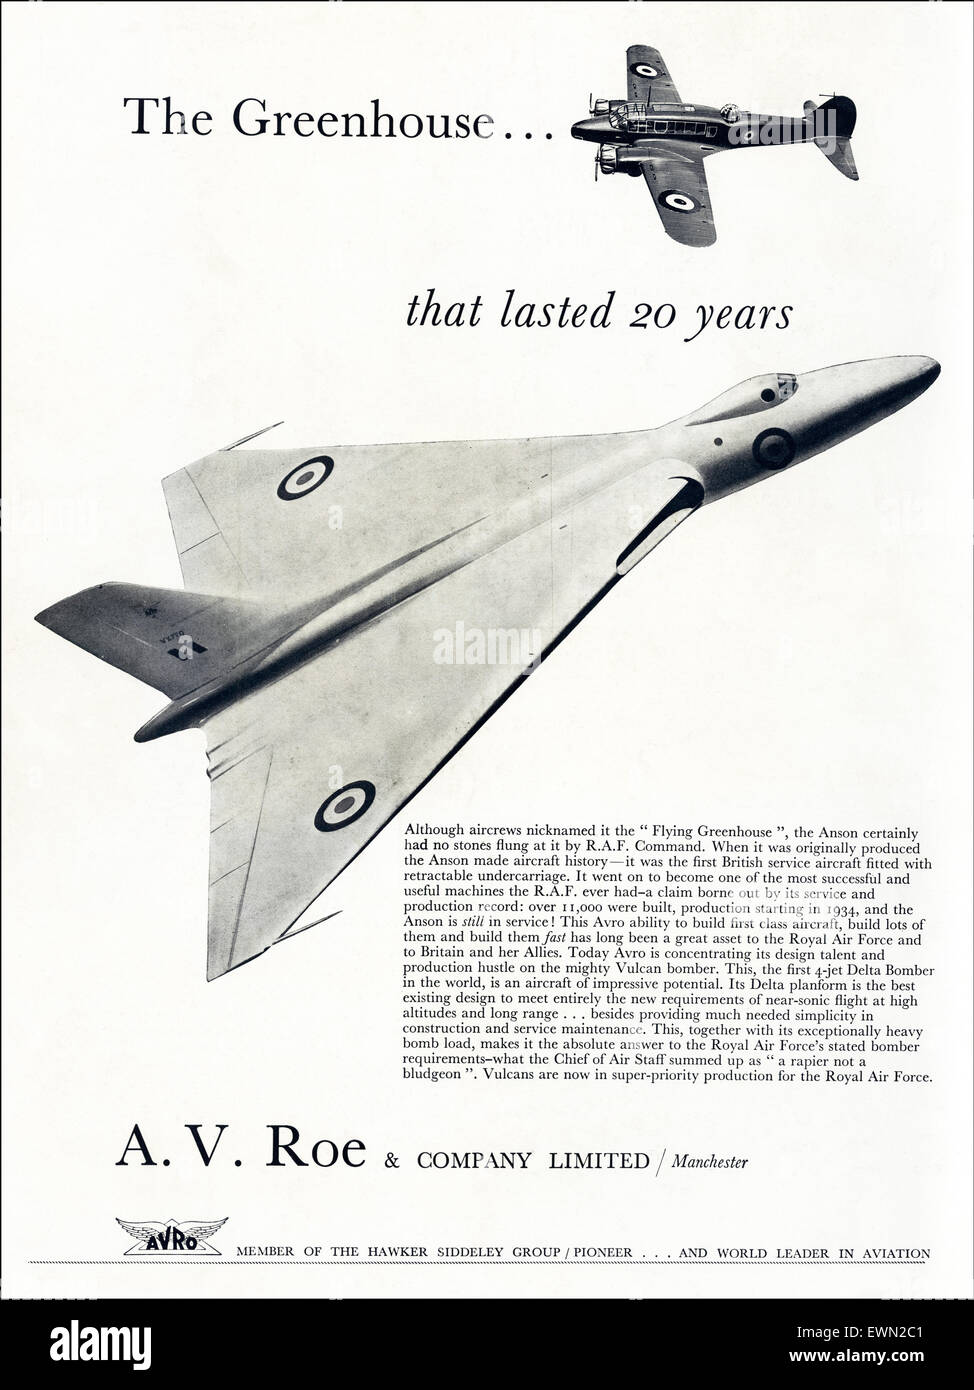 1950s advertisement circa 1954 magazine advert for A.V. Roe & Company Limited aircraft manufacturers of Manchester Stock Photo